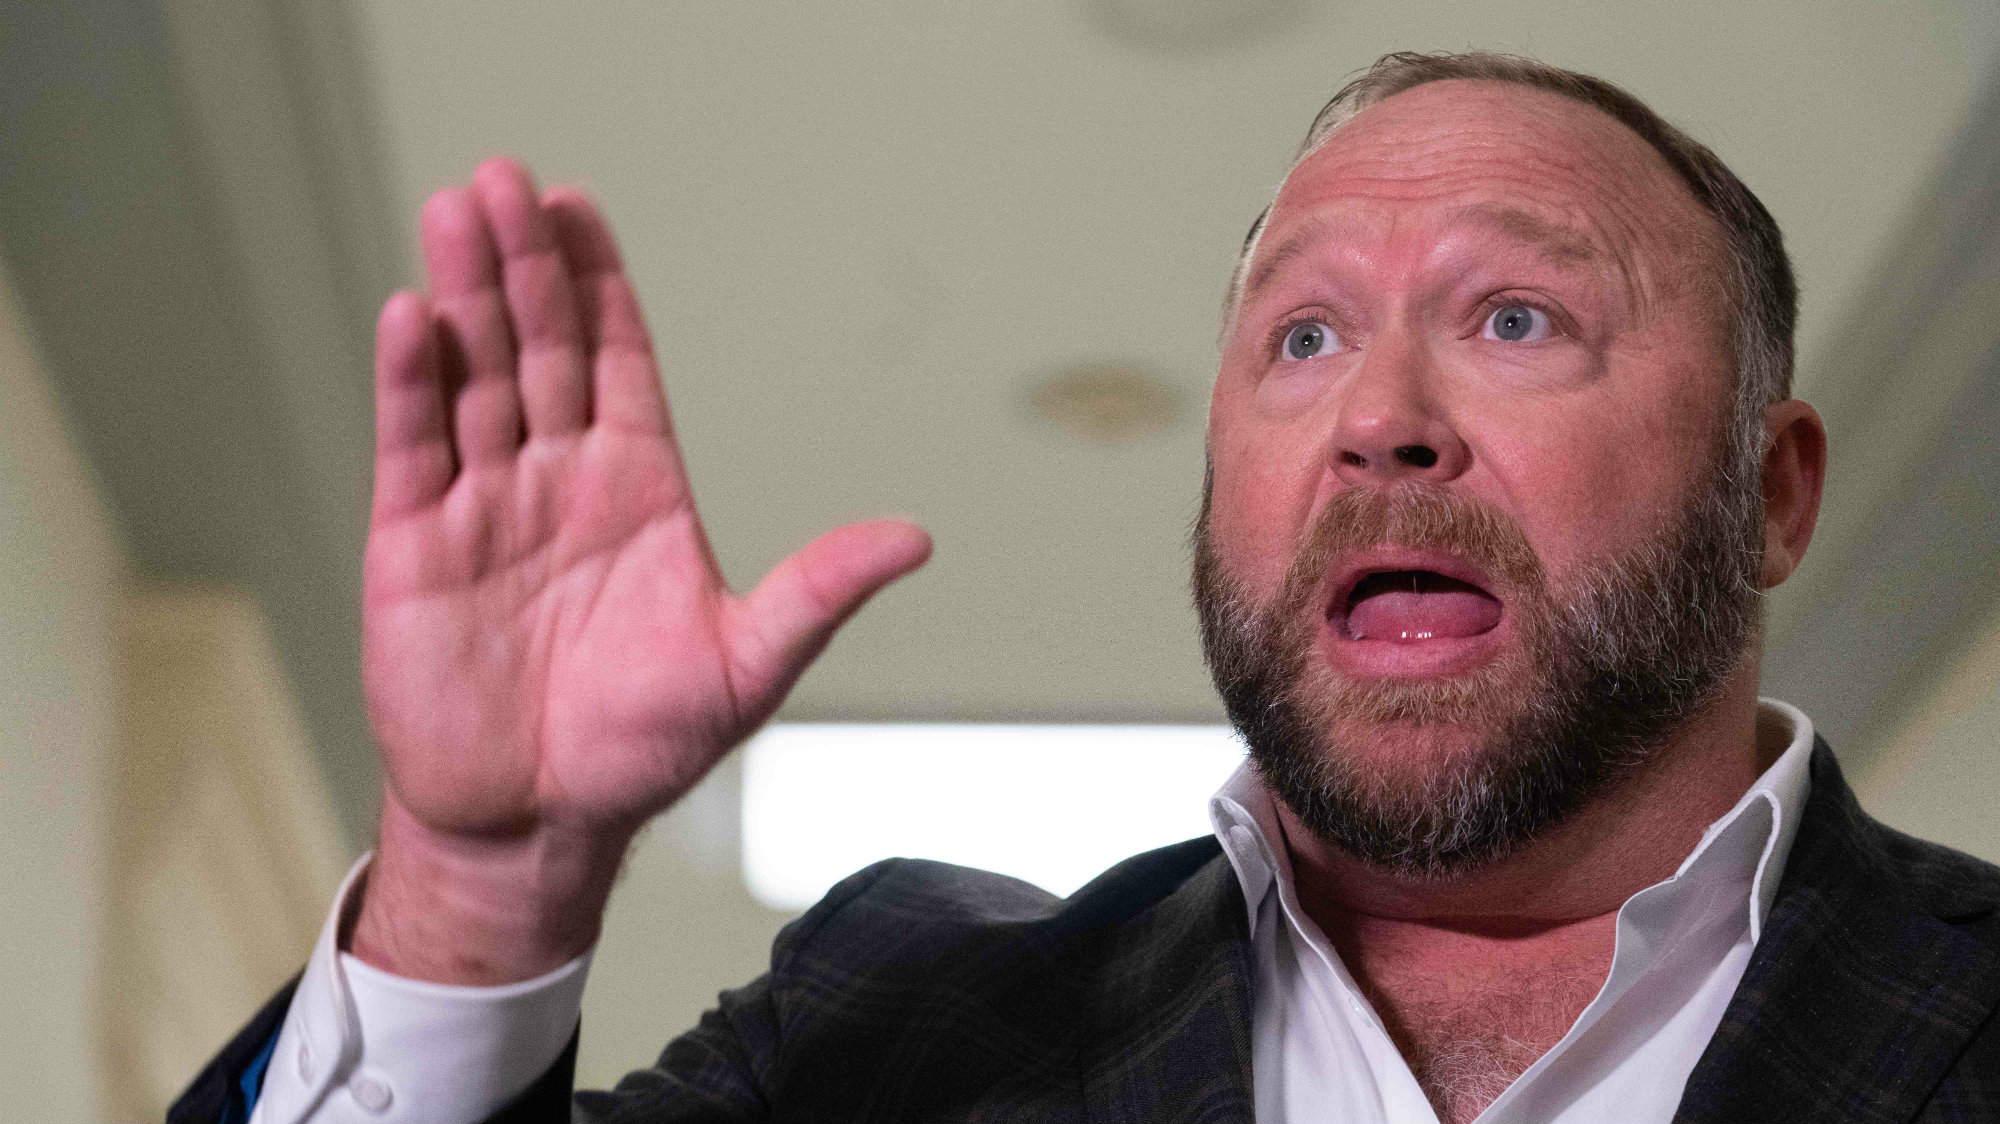 NY Attorney General Tells Alex Jones to Stop Suggesting His Products